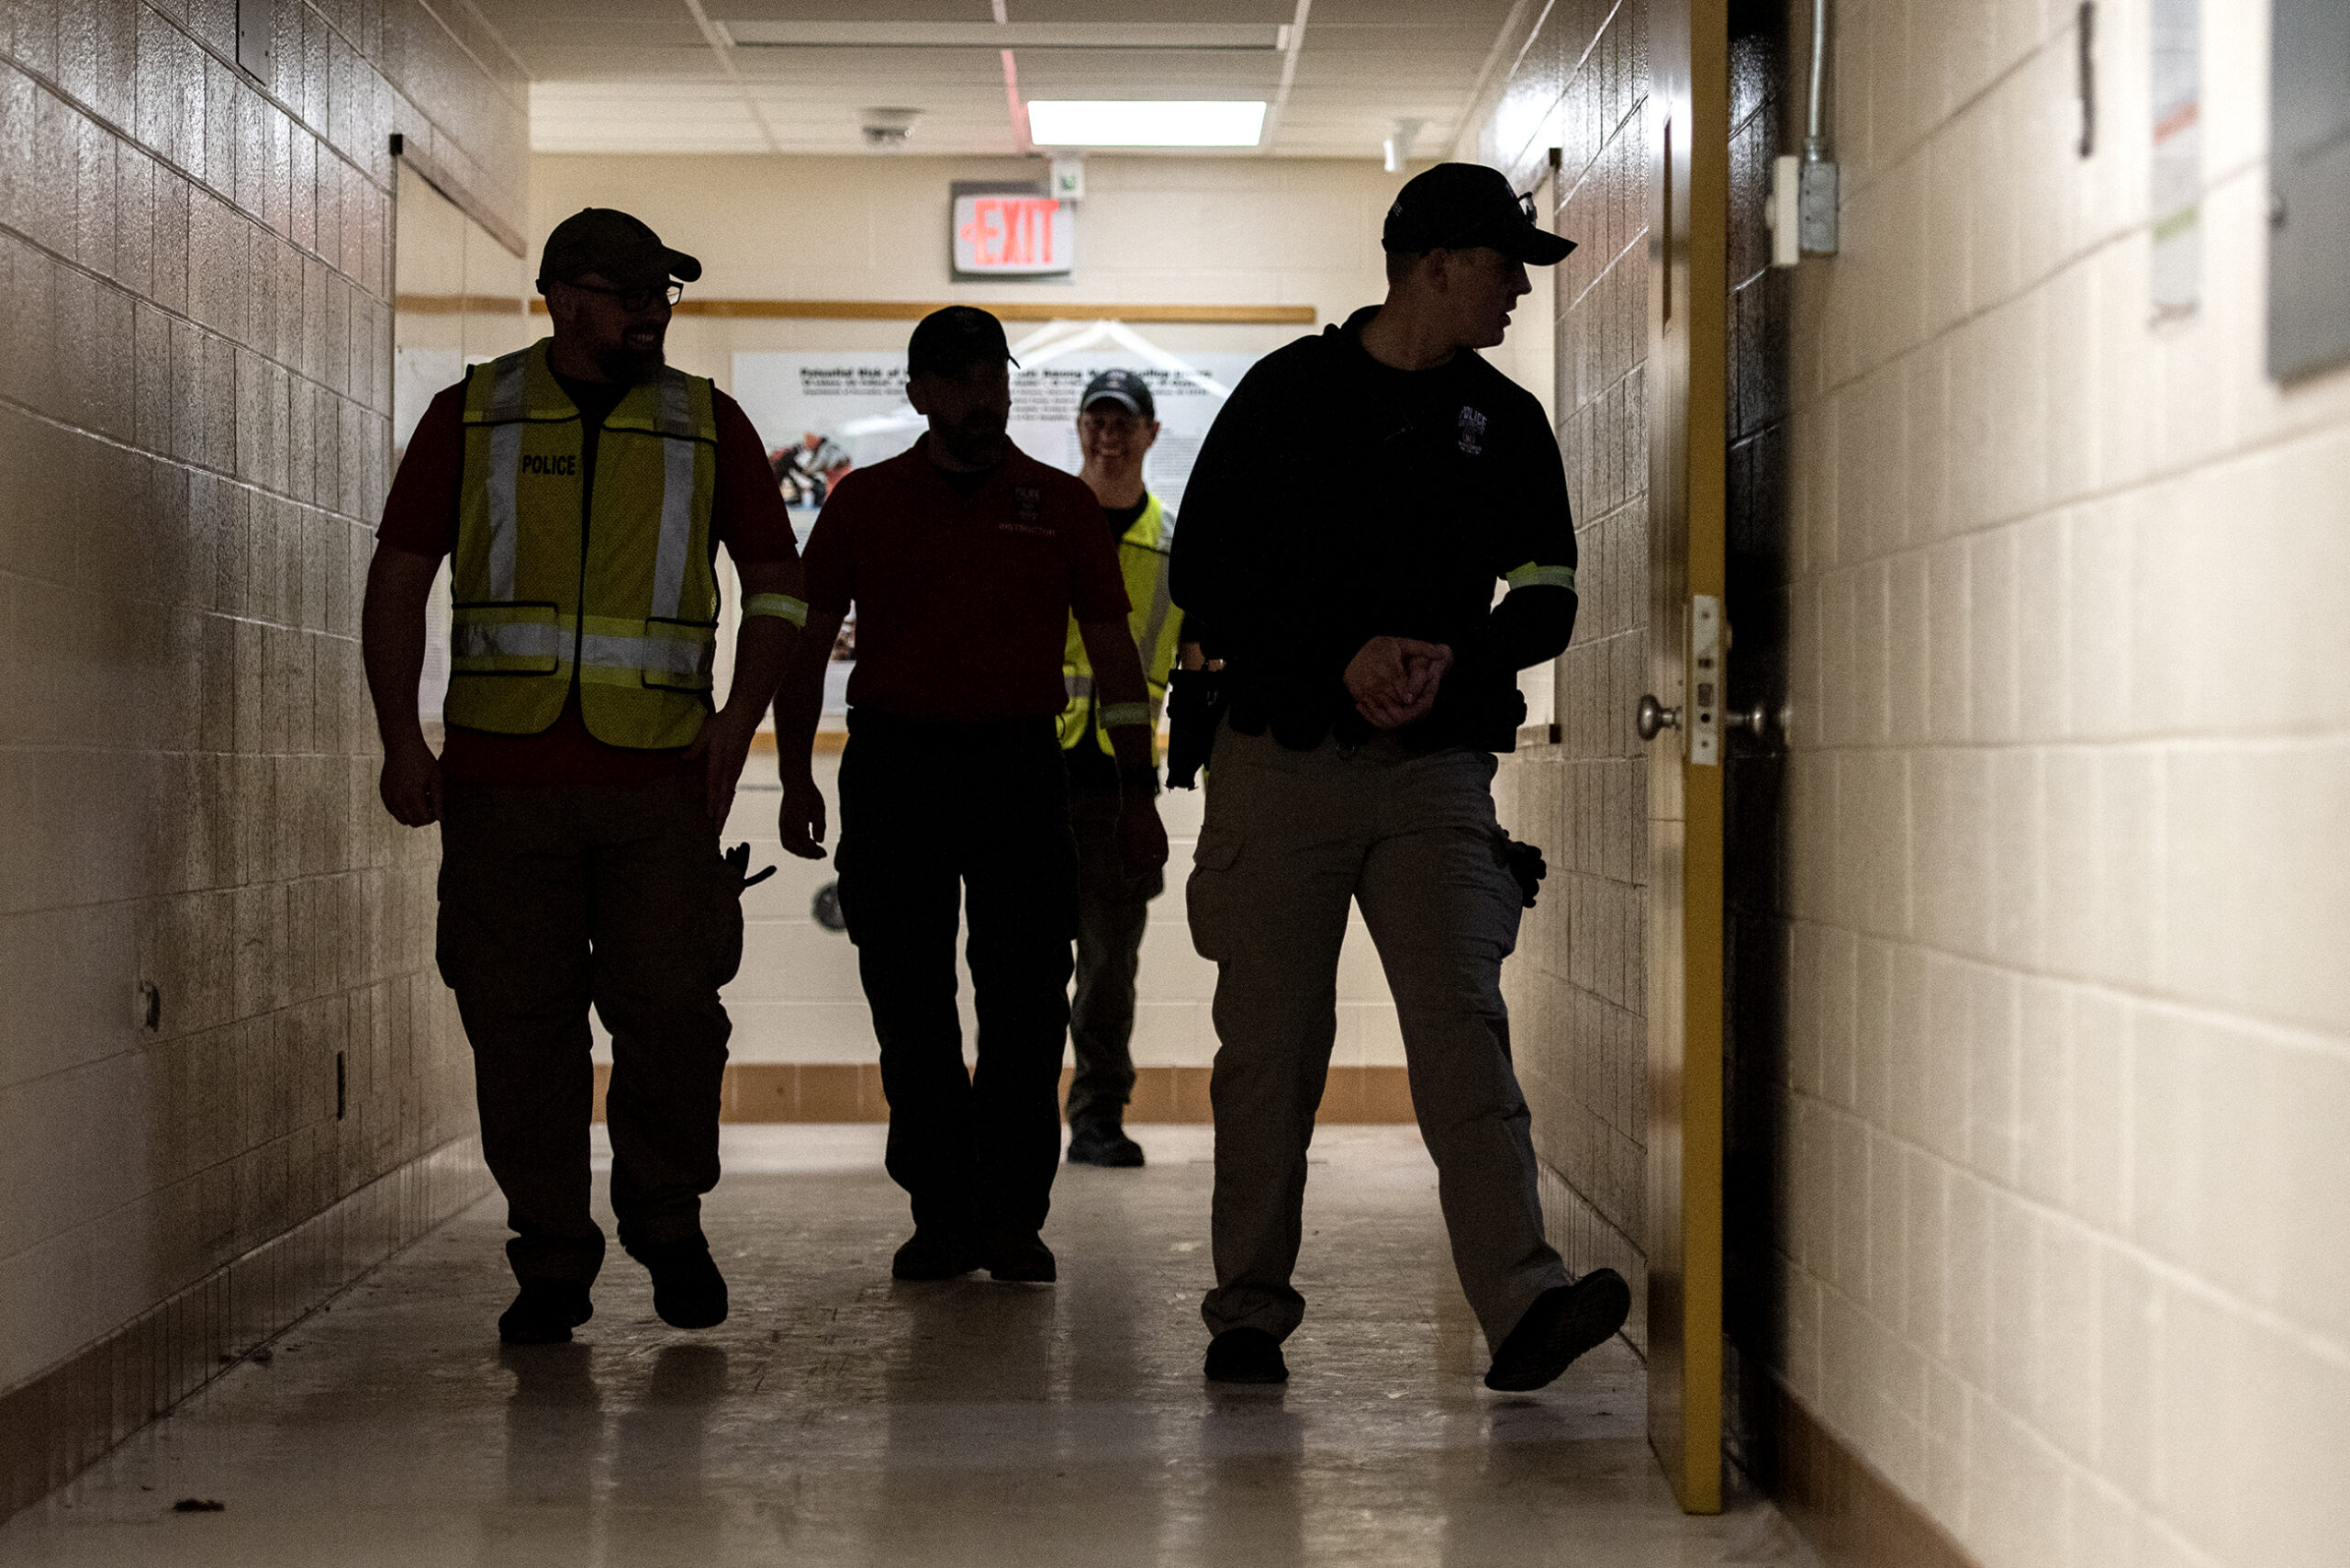 The silhouette of four officers in a school hallway as a training exercise takes place.